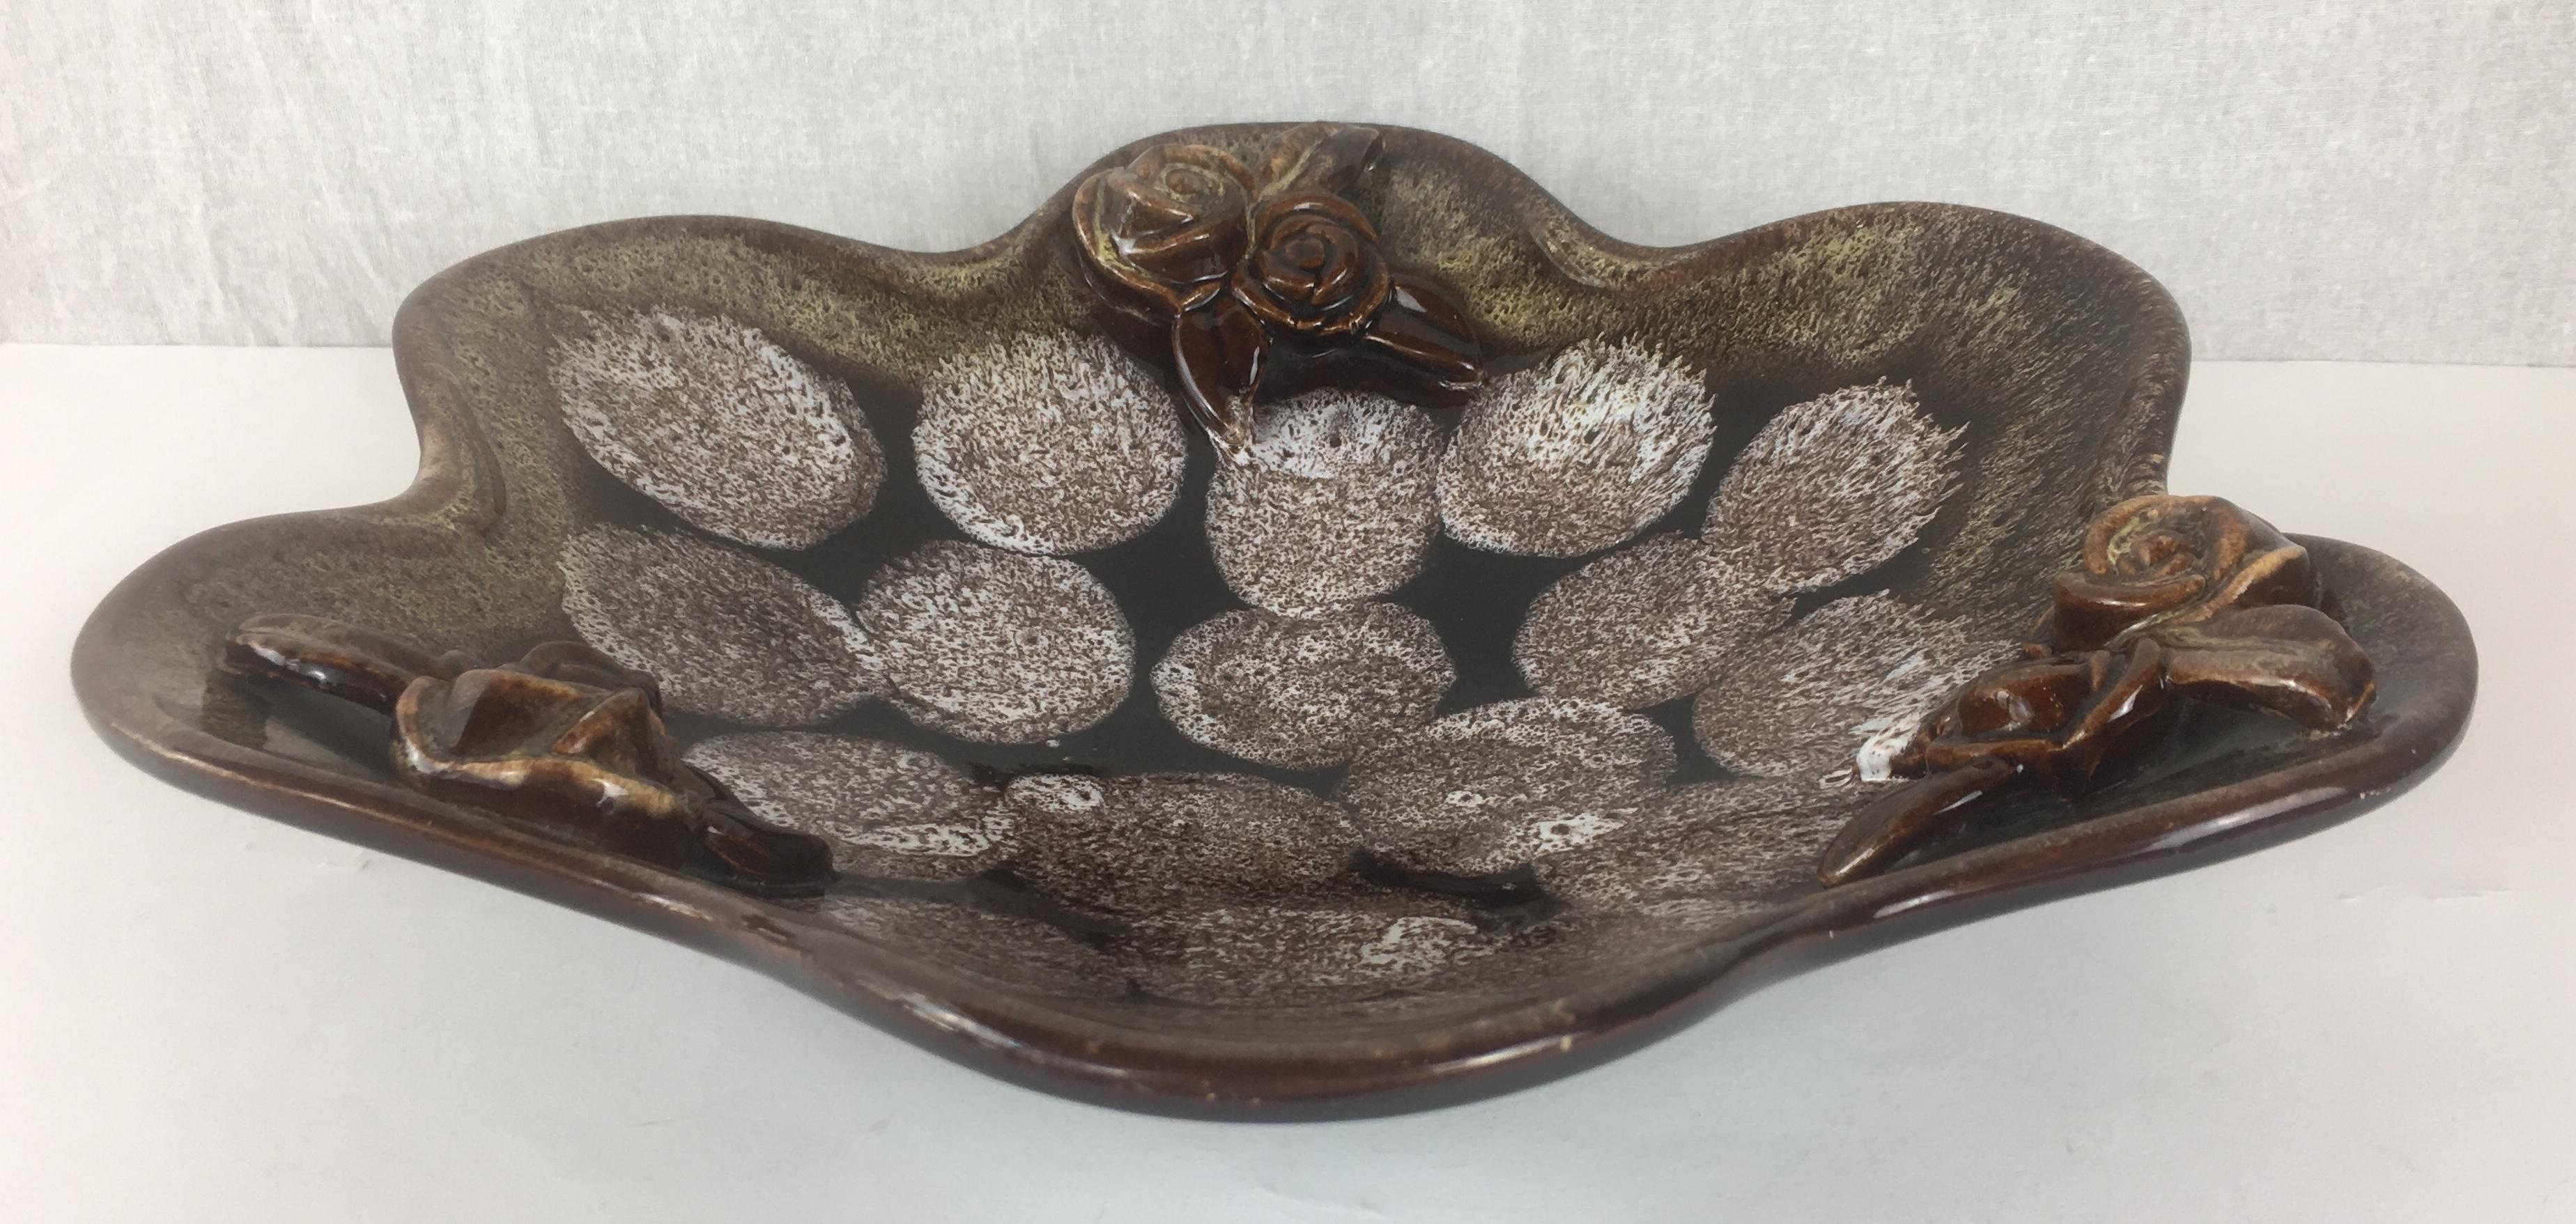 A fine decorative bowl with beautiful beige and brown hues. This mid-century ceramic bowl with earth tones is wonderful decorative object, very pleasing to the eye and has interesting floral details. 

Marked Germany and numbered 1920134. 
Measures: